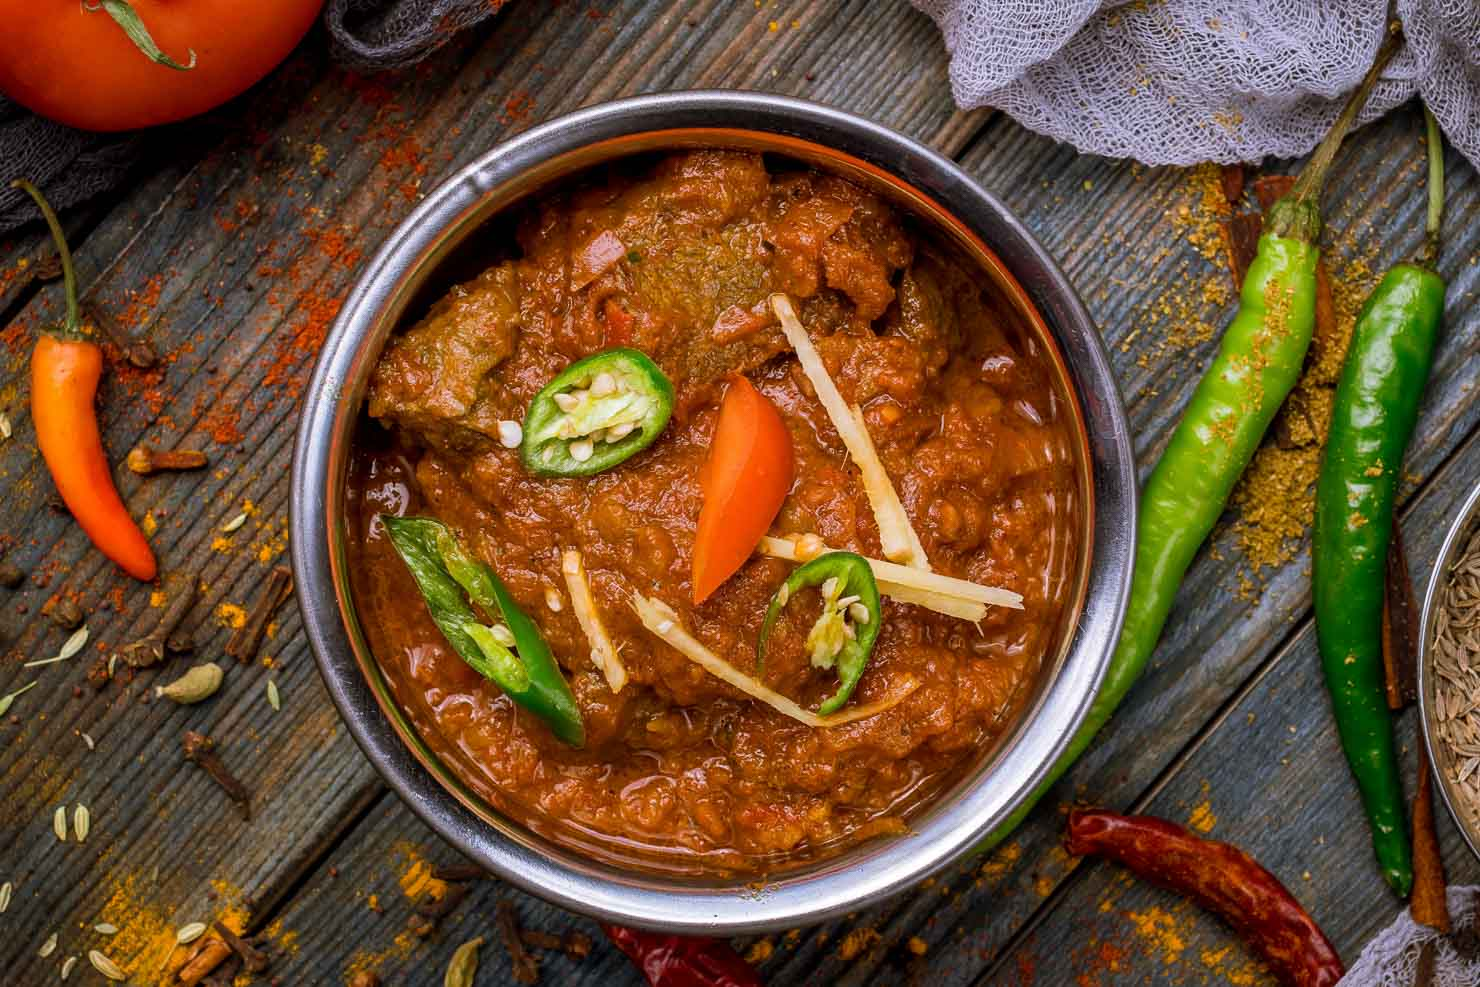 Lamb Rogan Josh dish from Himalaya Granville, perfect for an Indian Dinner Party at home